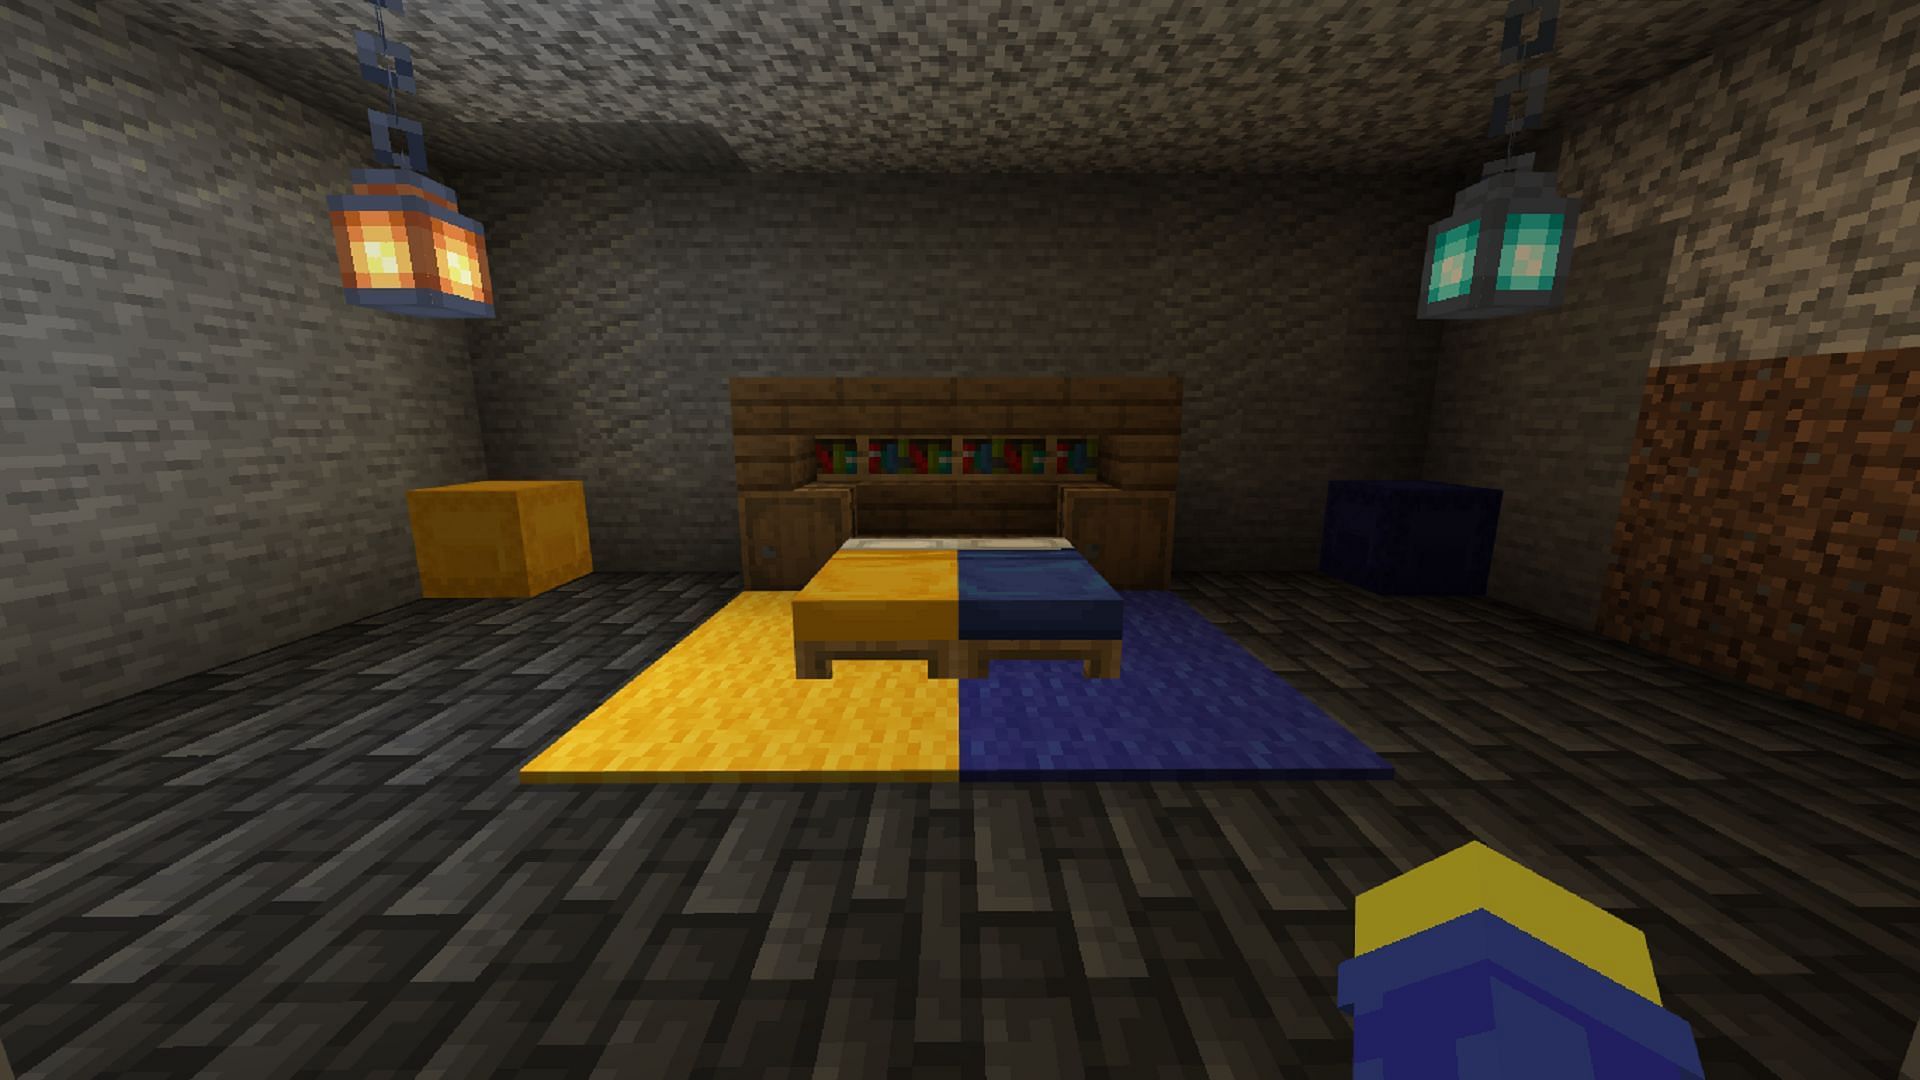 The half-and-half concept of this bedroom design can be applied to many of its counterparts (Image via Mojang)